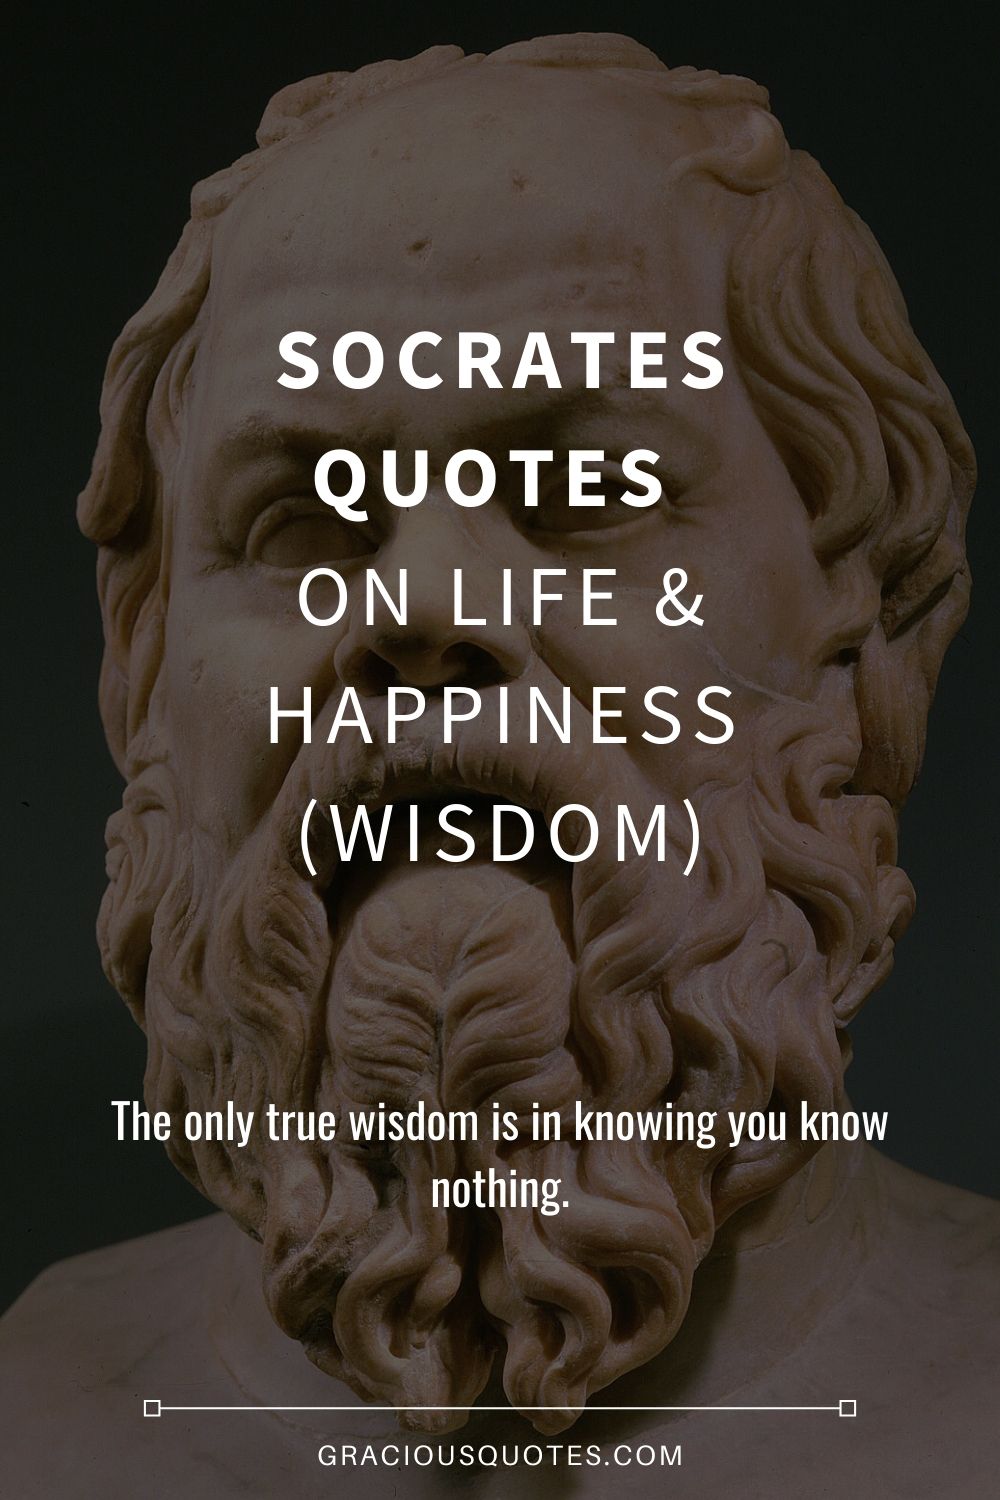 Socrates Quotes on Life & Happiness (WISDOM) - Gracious Quotes